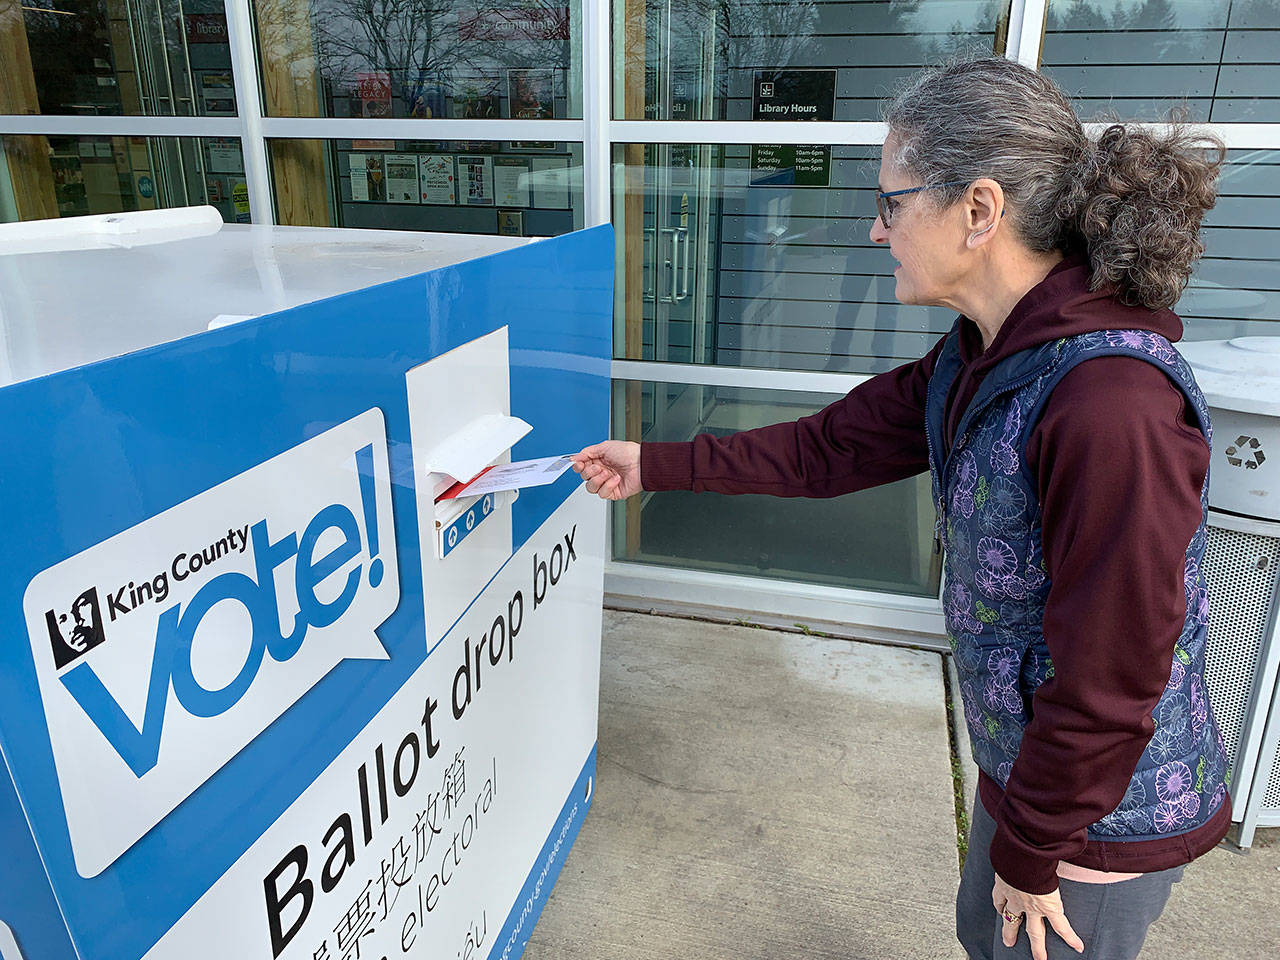 Island resident Pati Russell-Lamboau drops off her ballot at the King County Elections voter drop box at the library on Friday, Feb. 28. (Kevin Opsahl/Staff Photo)